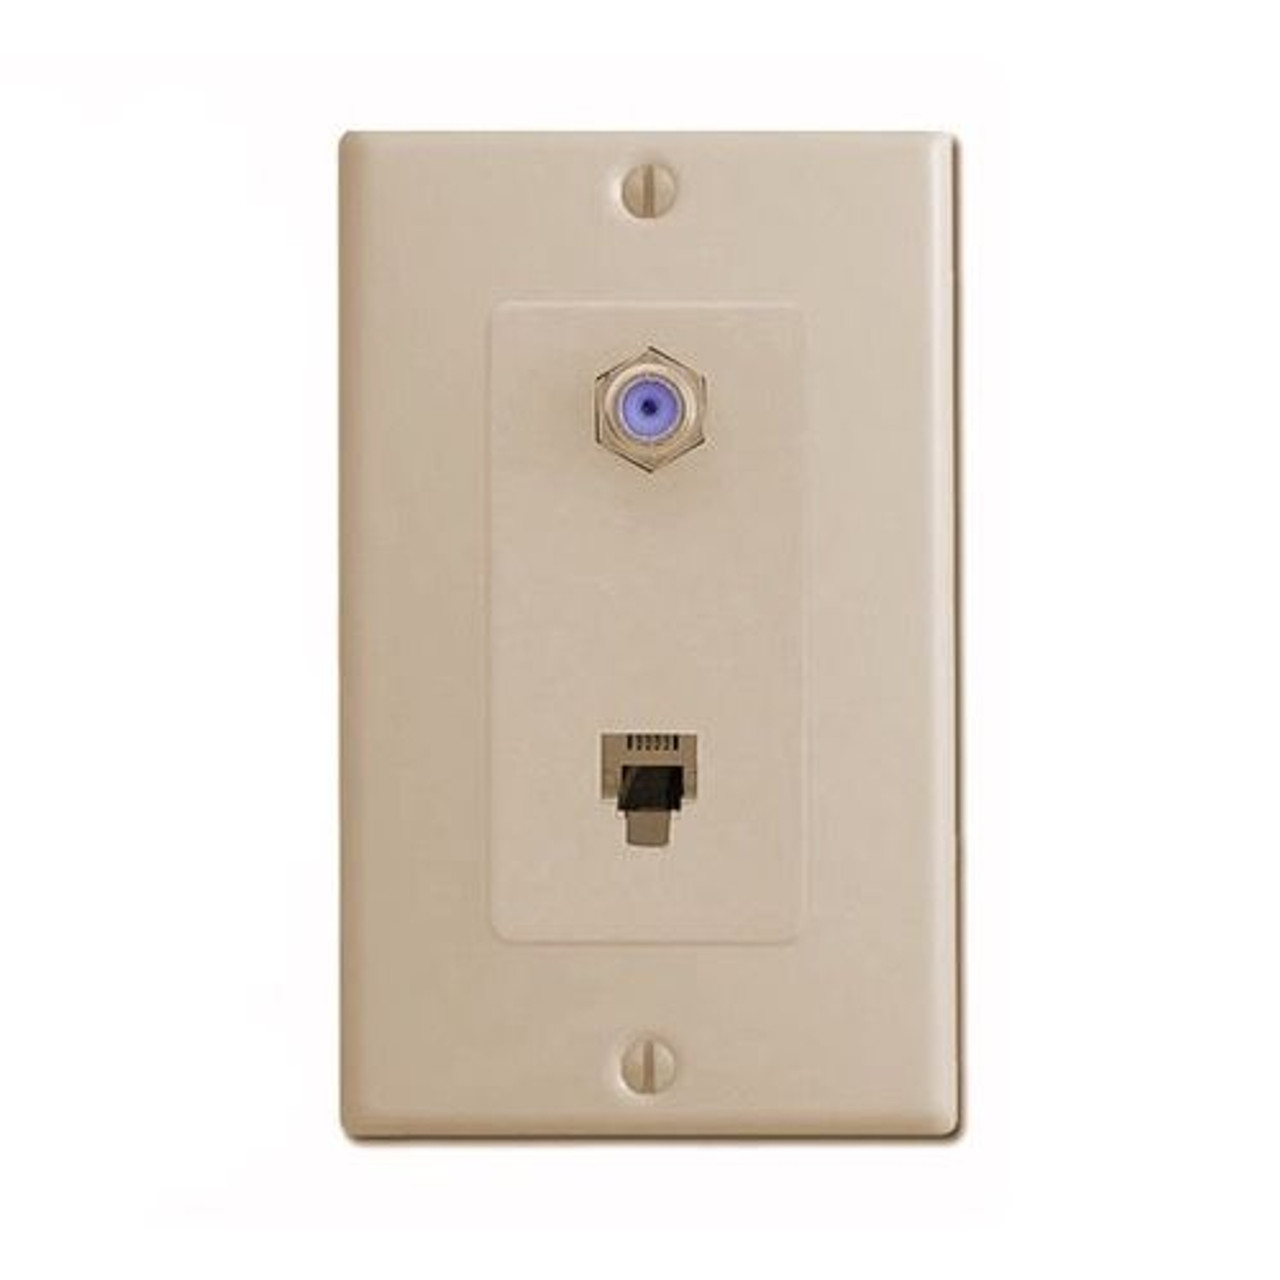 DirecTV Wall Plate Telephone F Jack Ivory 3 GHz RJ11 F-81 F-Connector Phone Modular 6P4C Jack Coax Combo Jack TV Antenna Video Coaxial Cable Connectors